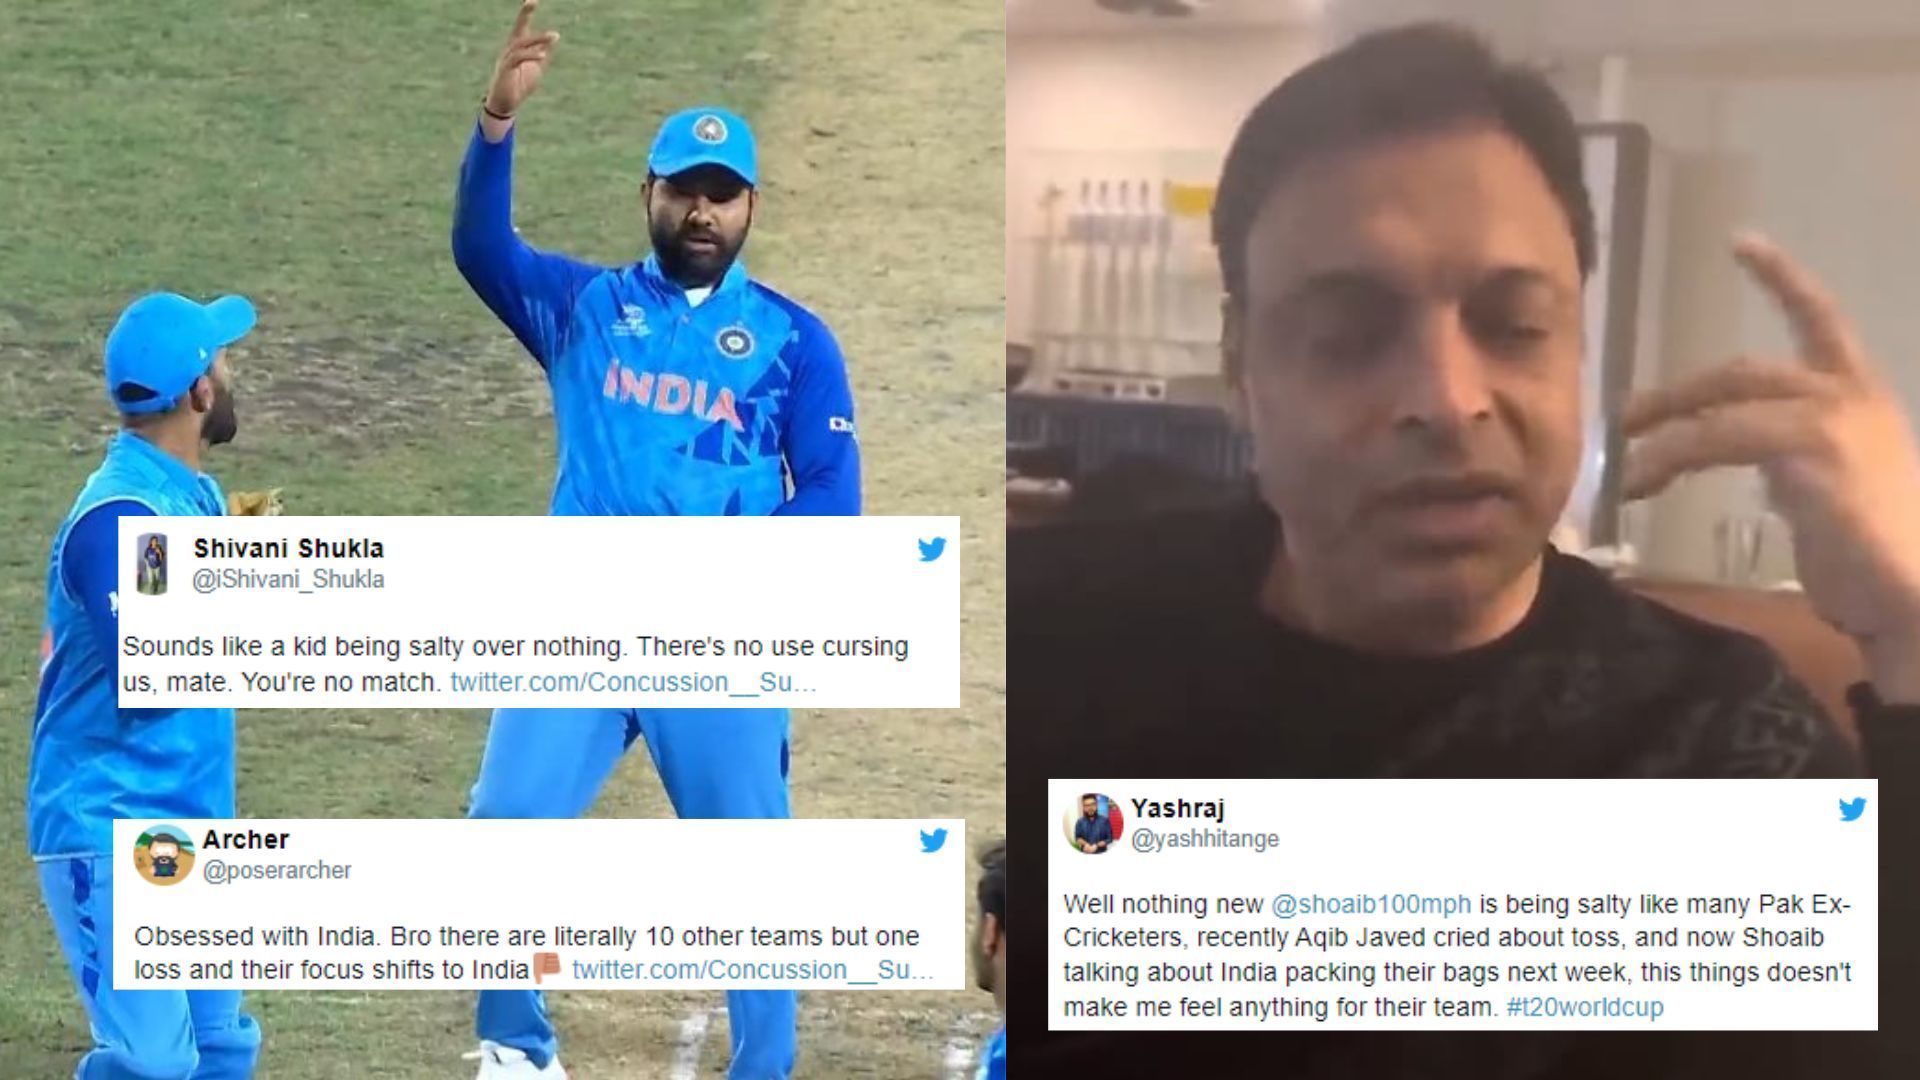 Fans felt there was no need for Shoaib Akhtar to mention India while talking about Pakistan. (P.C.:Twitter)